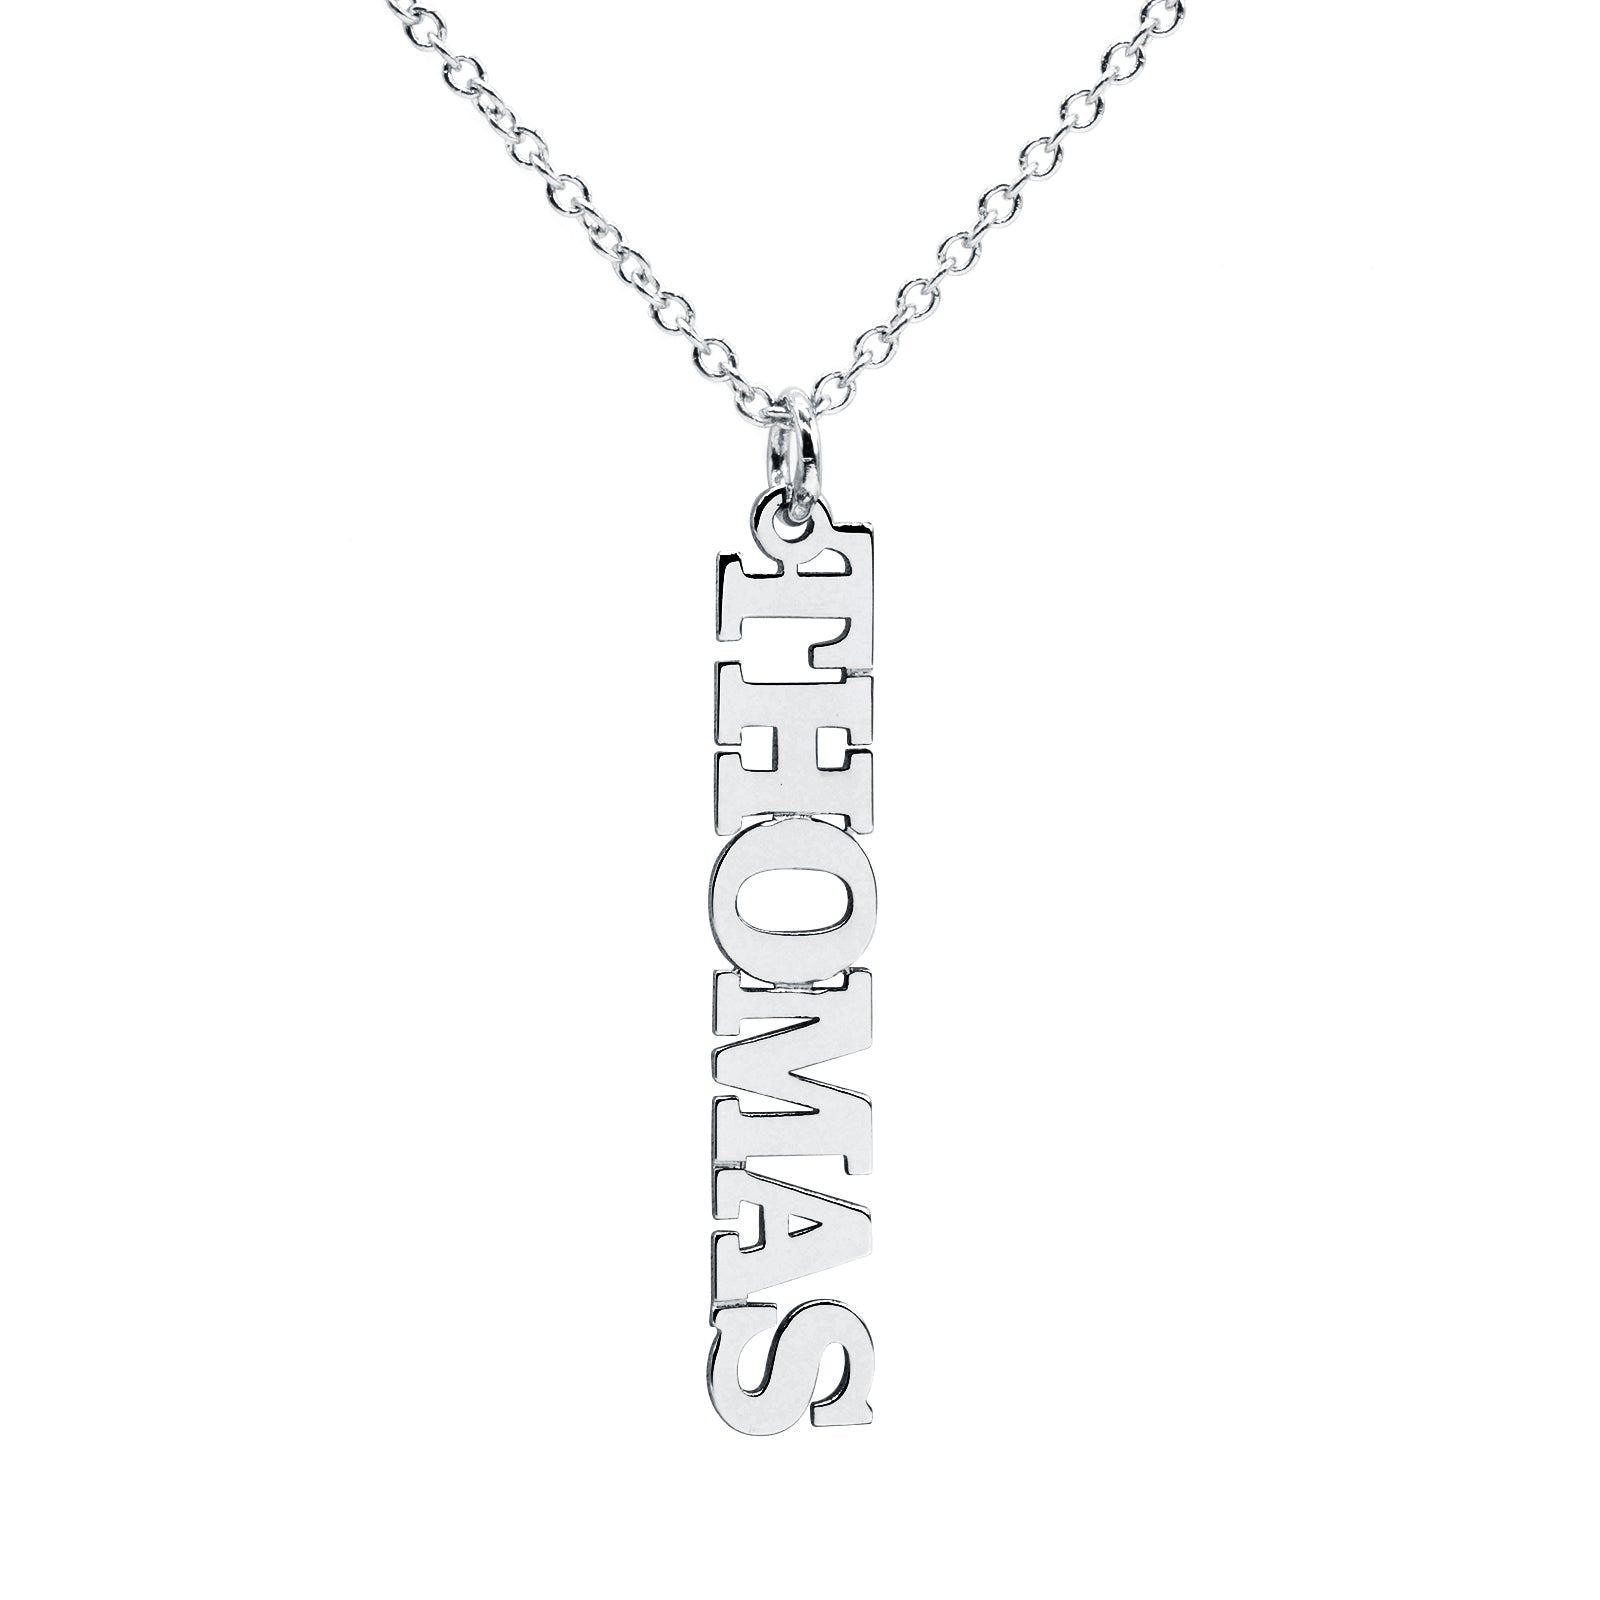 Solid Nameplate Necklace